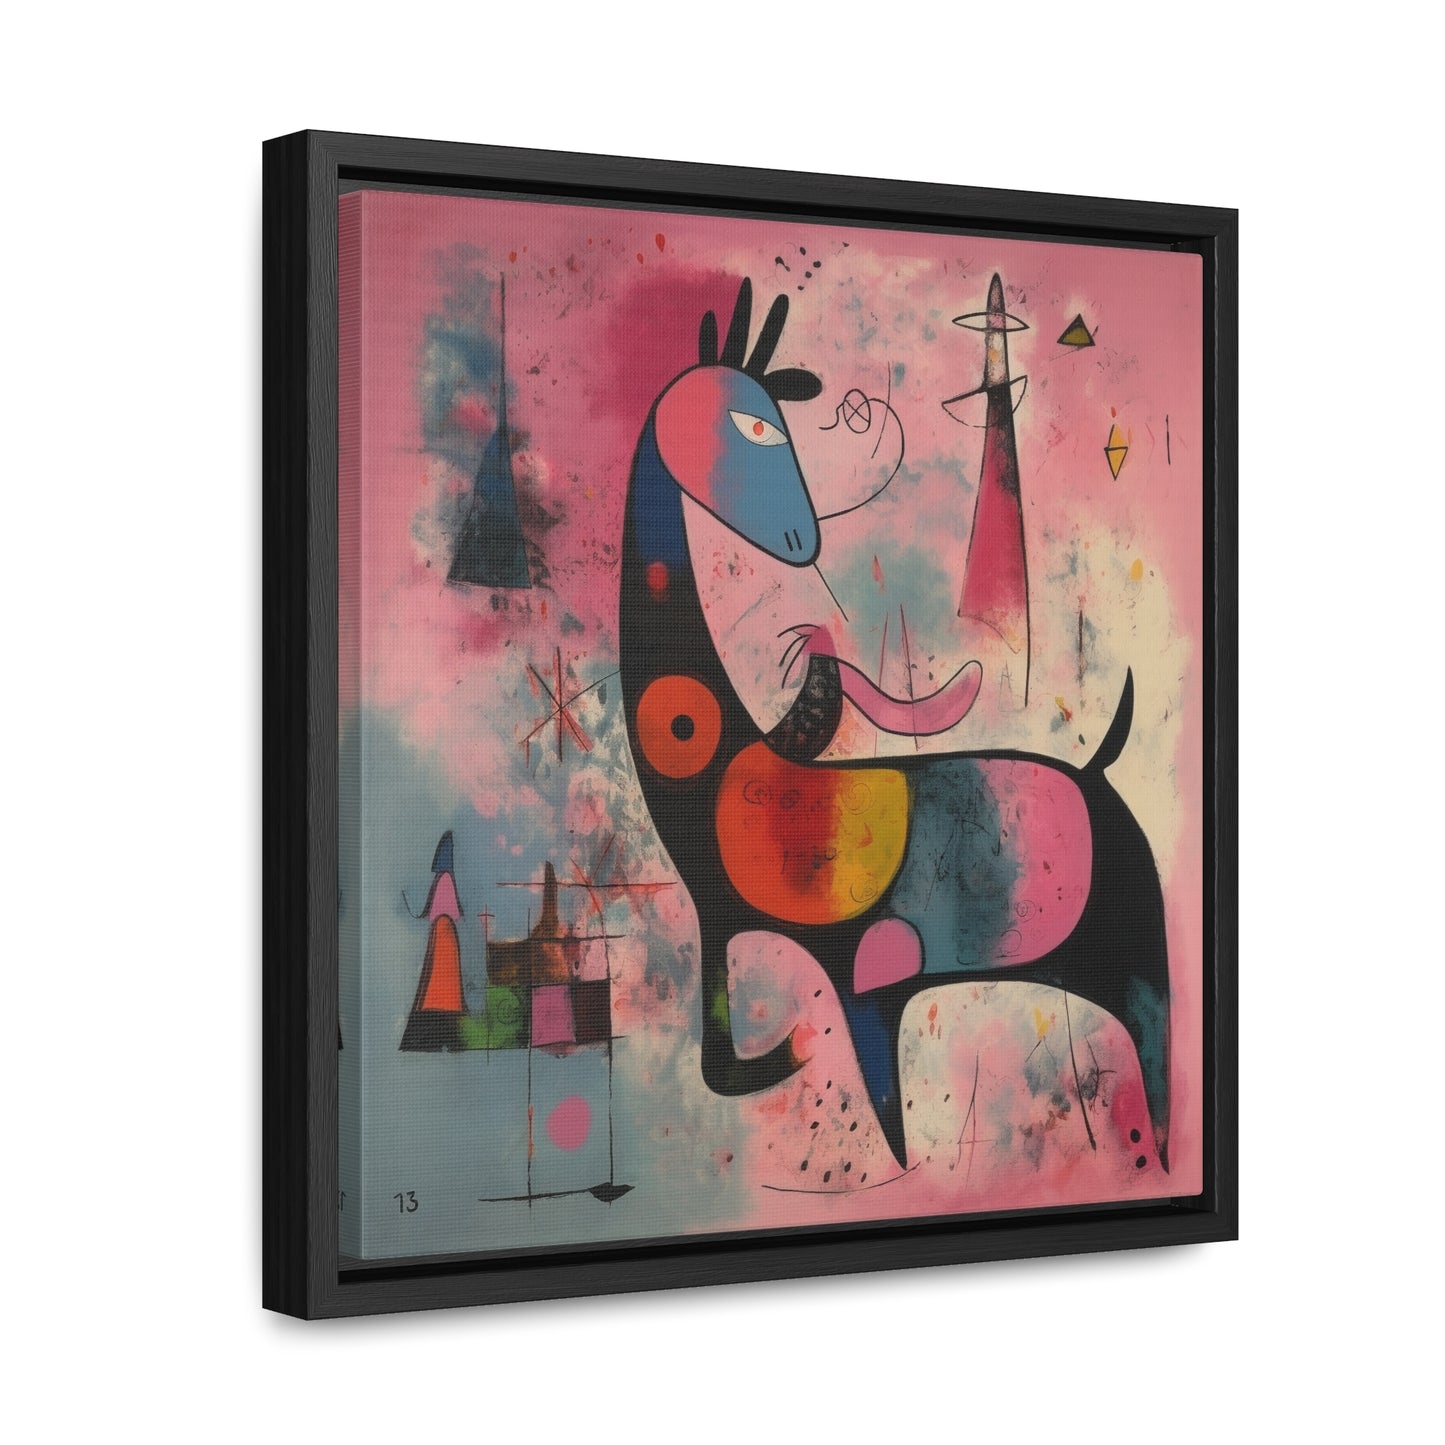 The Dreams of the Child 23, Gallery Canvas Wraps, Square Frame